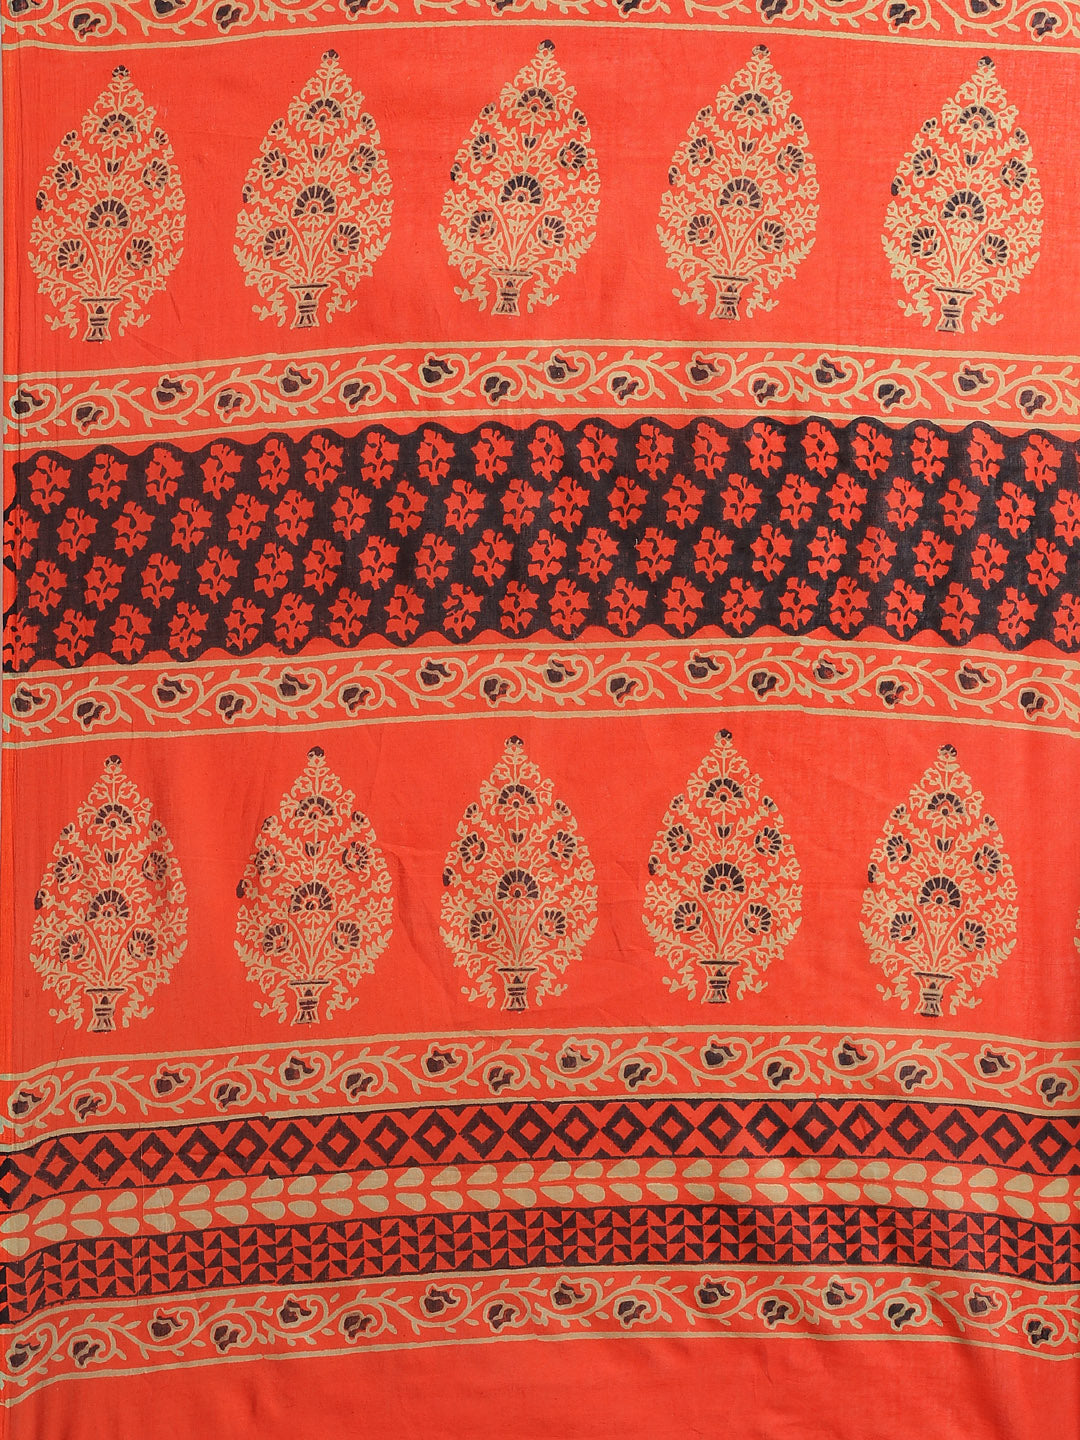 Orange and Black, Kalakari India Cotton Orange Hand crafted saree with blouse BAPASA0103-Saree-Kalakari India-BAPASA0103-Block Print, Cotton, Geographical Indication, Hand Crafted, Heritage Prints, Natural Dyes, Red, Sarees, Sustainable Fabrics, Woven, Yellow-[Linen,Ethnic,wear,Fashionista,Handloom,Handicraft,Indigo,blockprint,block,print,Cotton,Chanderi,Blue, latest,classy,party,bollywood,trendy,summer,style,traditional,formal,elegant,unique,style,hand,block,print, dabu,booti,gift,present,glamo